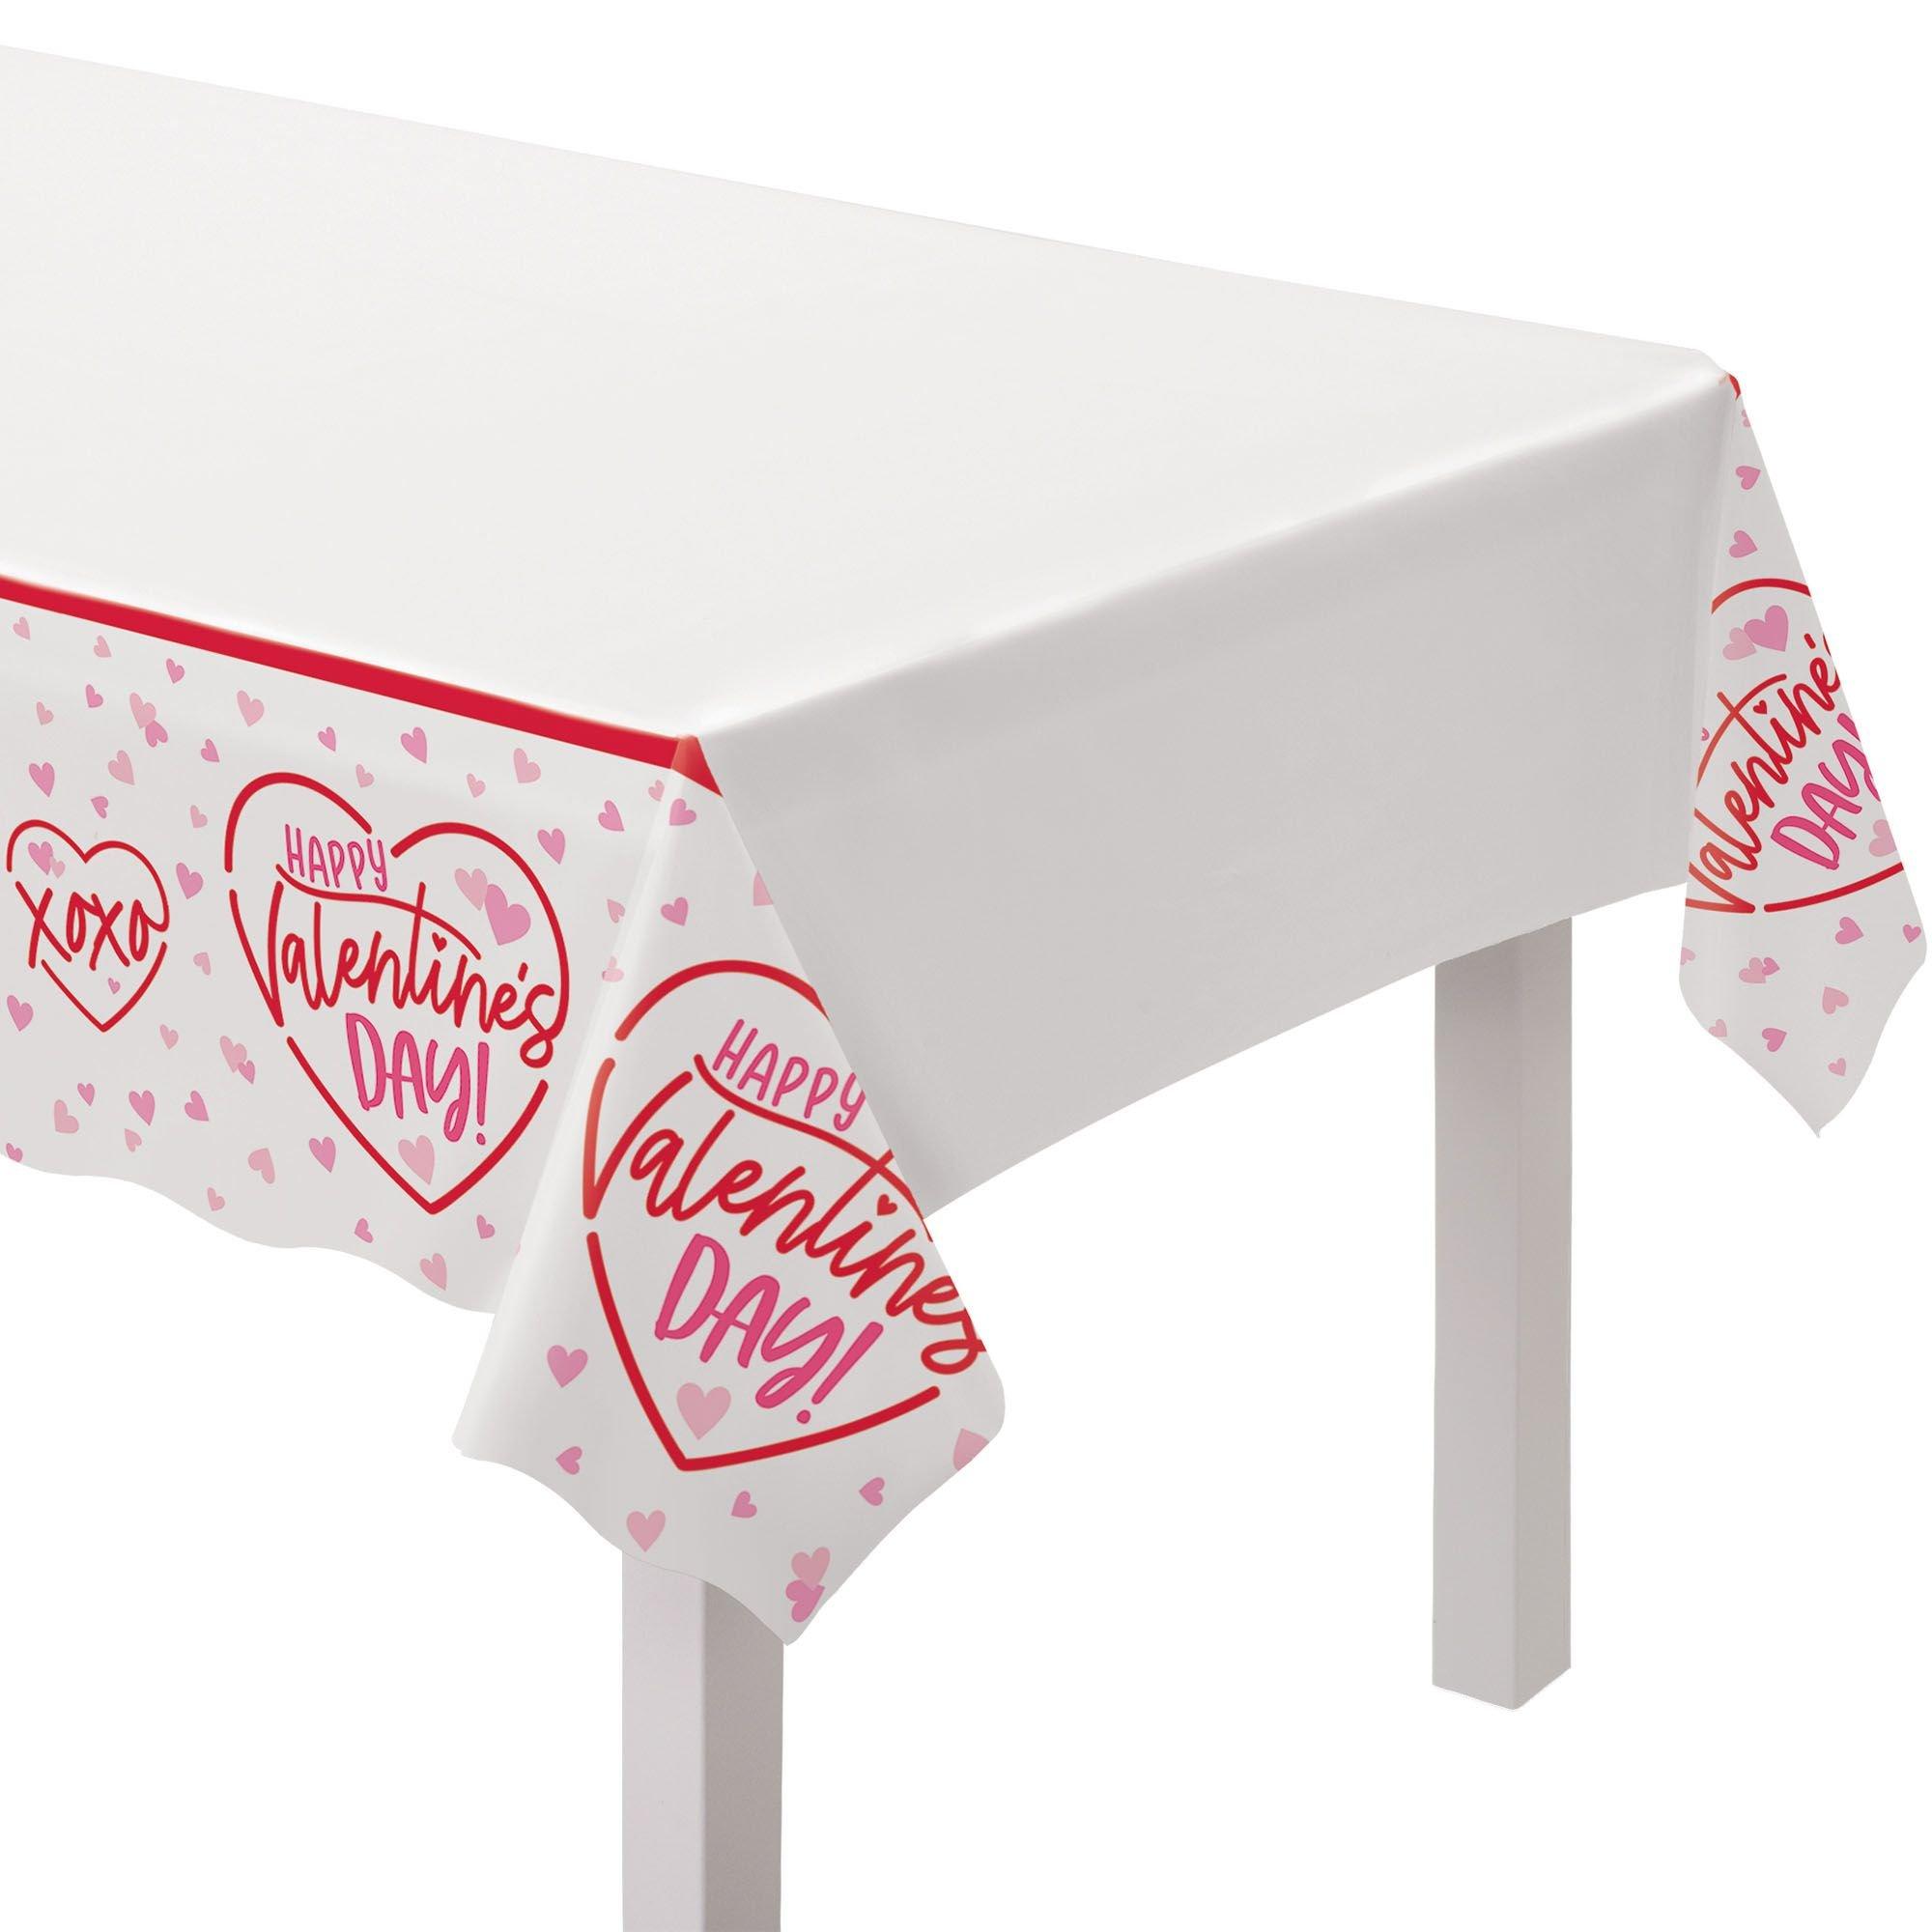 Plastic I Heart Valentine's Day Table Cover, 84 x 54